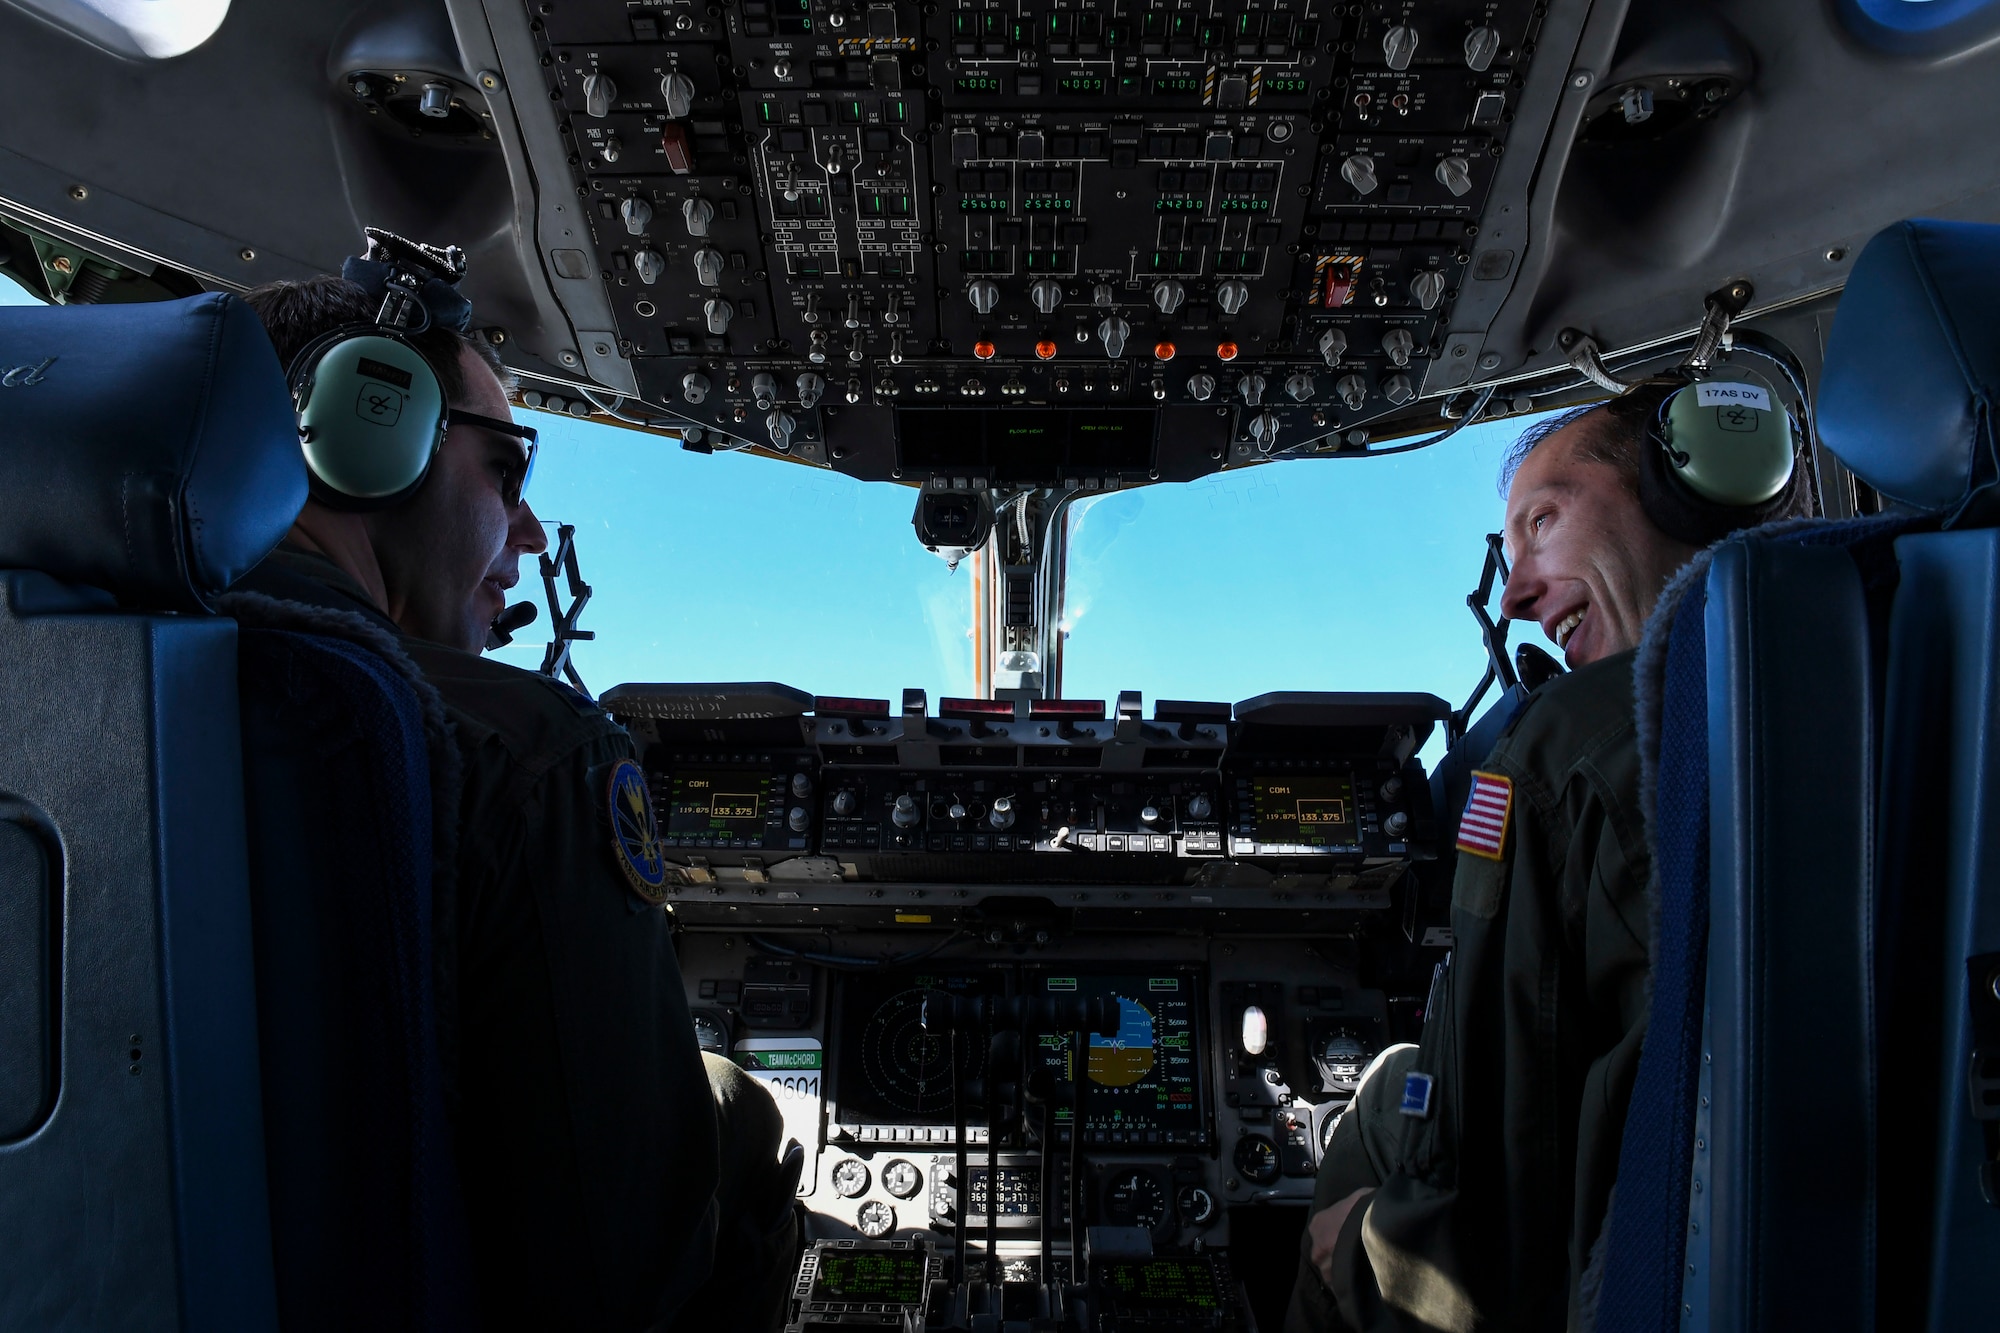 Capt. Brian Coble, co-pilot with the 758th Airlift Squadron talks to Lt. Col. Thomas Clark, evaluator pilot with the 911th Operational Support Squadron during a training flight from Pittsburgh International Airport Air Reserve Station, Pennsylvaniam, to March Air Reserve Base, Ca., March 3, 2019. The flight was used as a multi-purpose flight, training aircrew while taking members of the 911th Maintenance Group to March ARB to train on performing various maintenance tasks. (U.S. Air Force photo by Joshua J. Seybert)